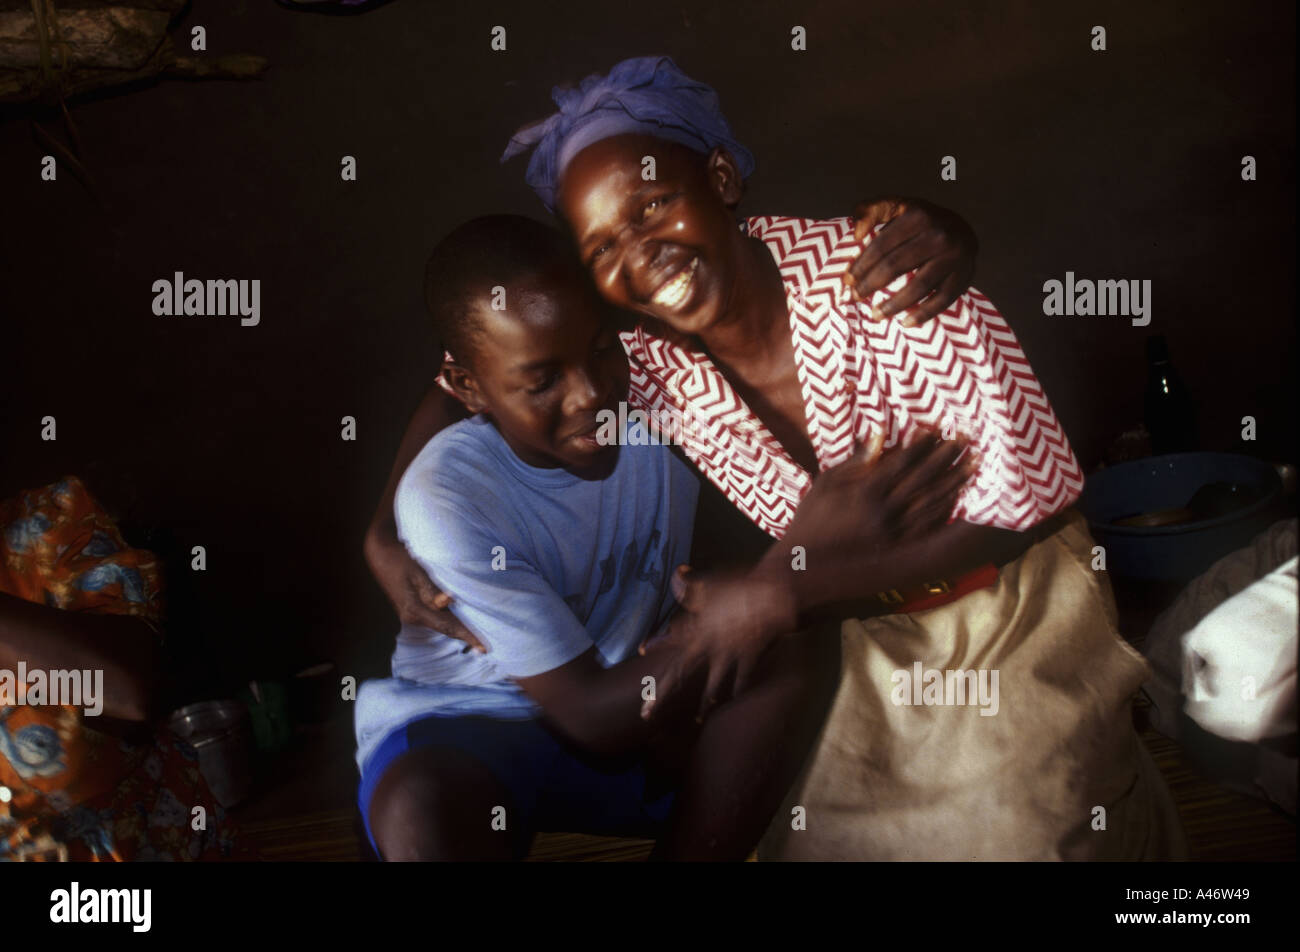 A boy abductee fighter from the Lords Resistance Army reunited with his mother and family, Gulu, Northern Uganda Stock Photo